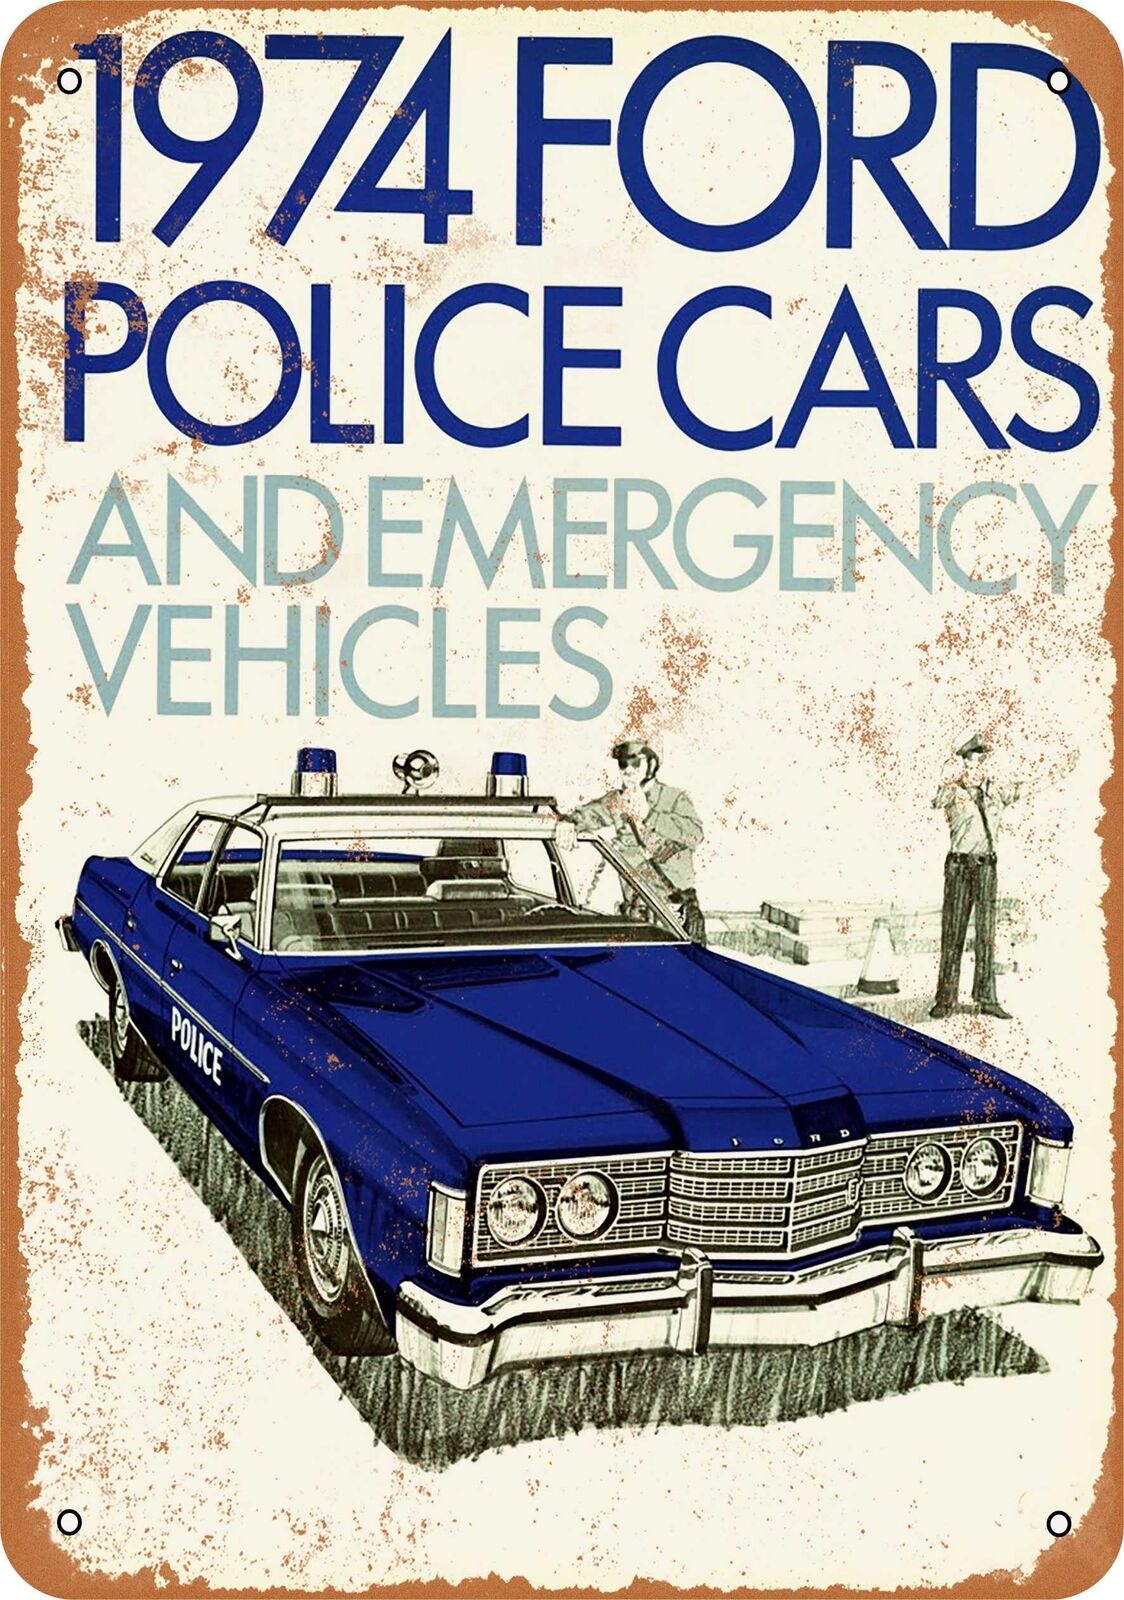 Metal Sign - 1974 Ford Police Cars - Vintage Look Reproduction